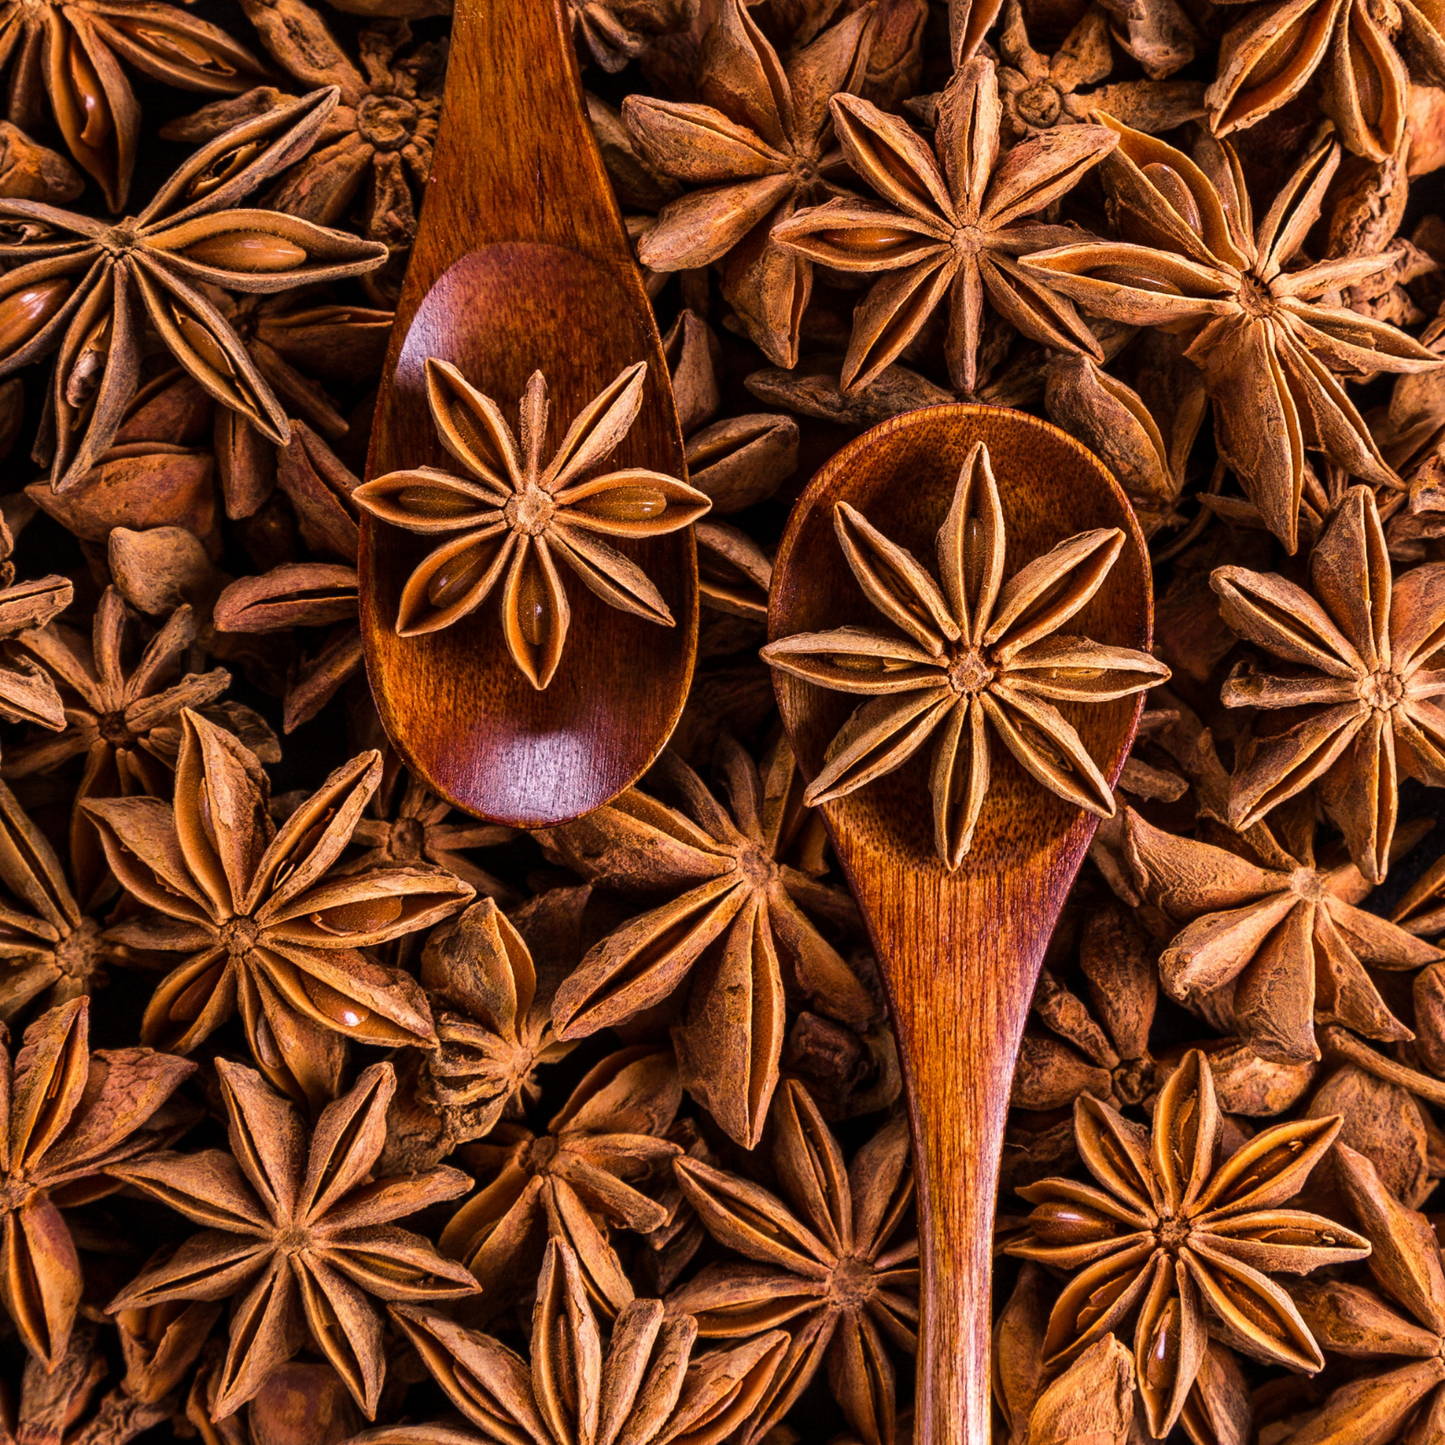 Anise Stars, Whole and Pieces Herb